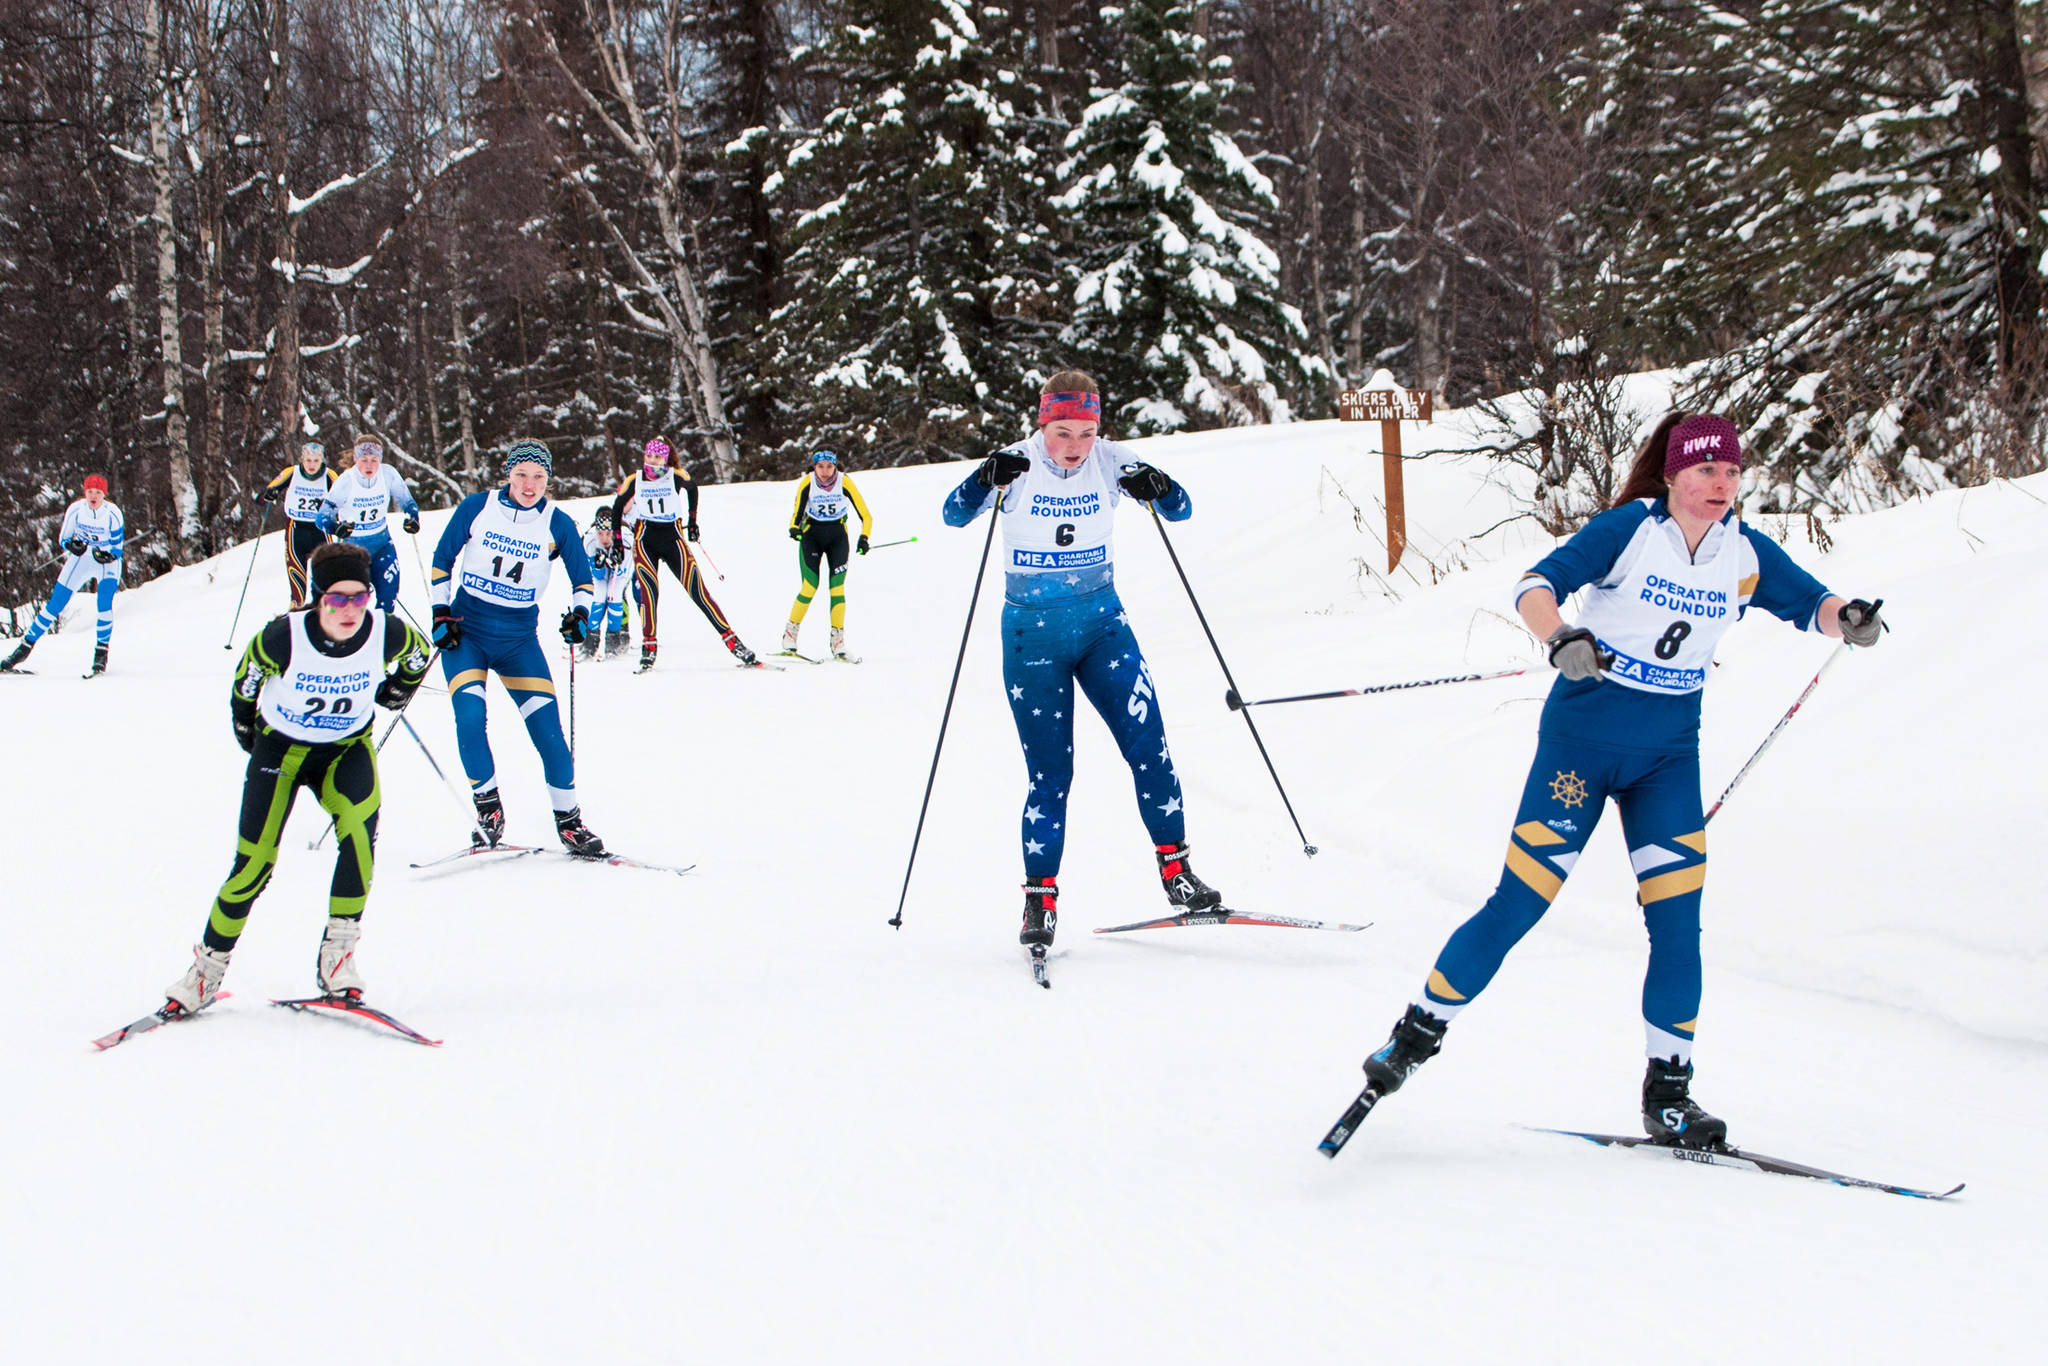 Katia Holmes (far right) and Zoe Stonorov (second from left) ski at the Region III meet held Friday and Saturday, Feb. 8-9, 2019 at the Government Peak Recreation Area near Palmer, Alaska. (Photo by Debbie Decker)